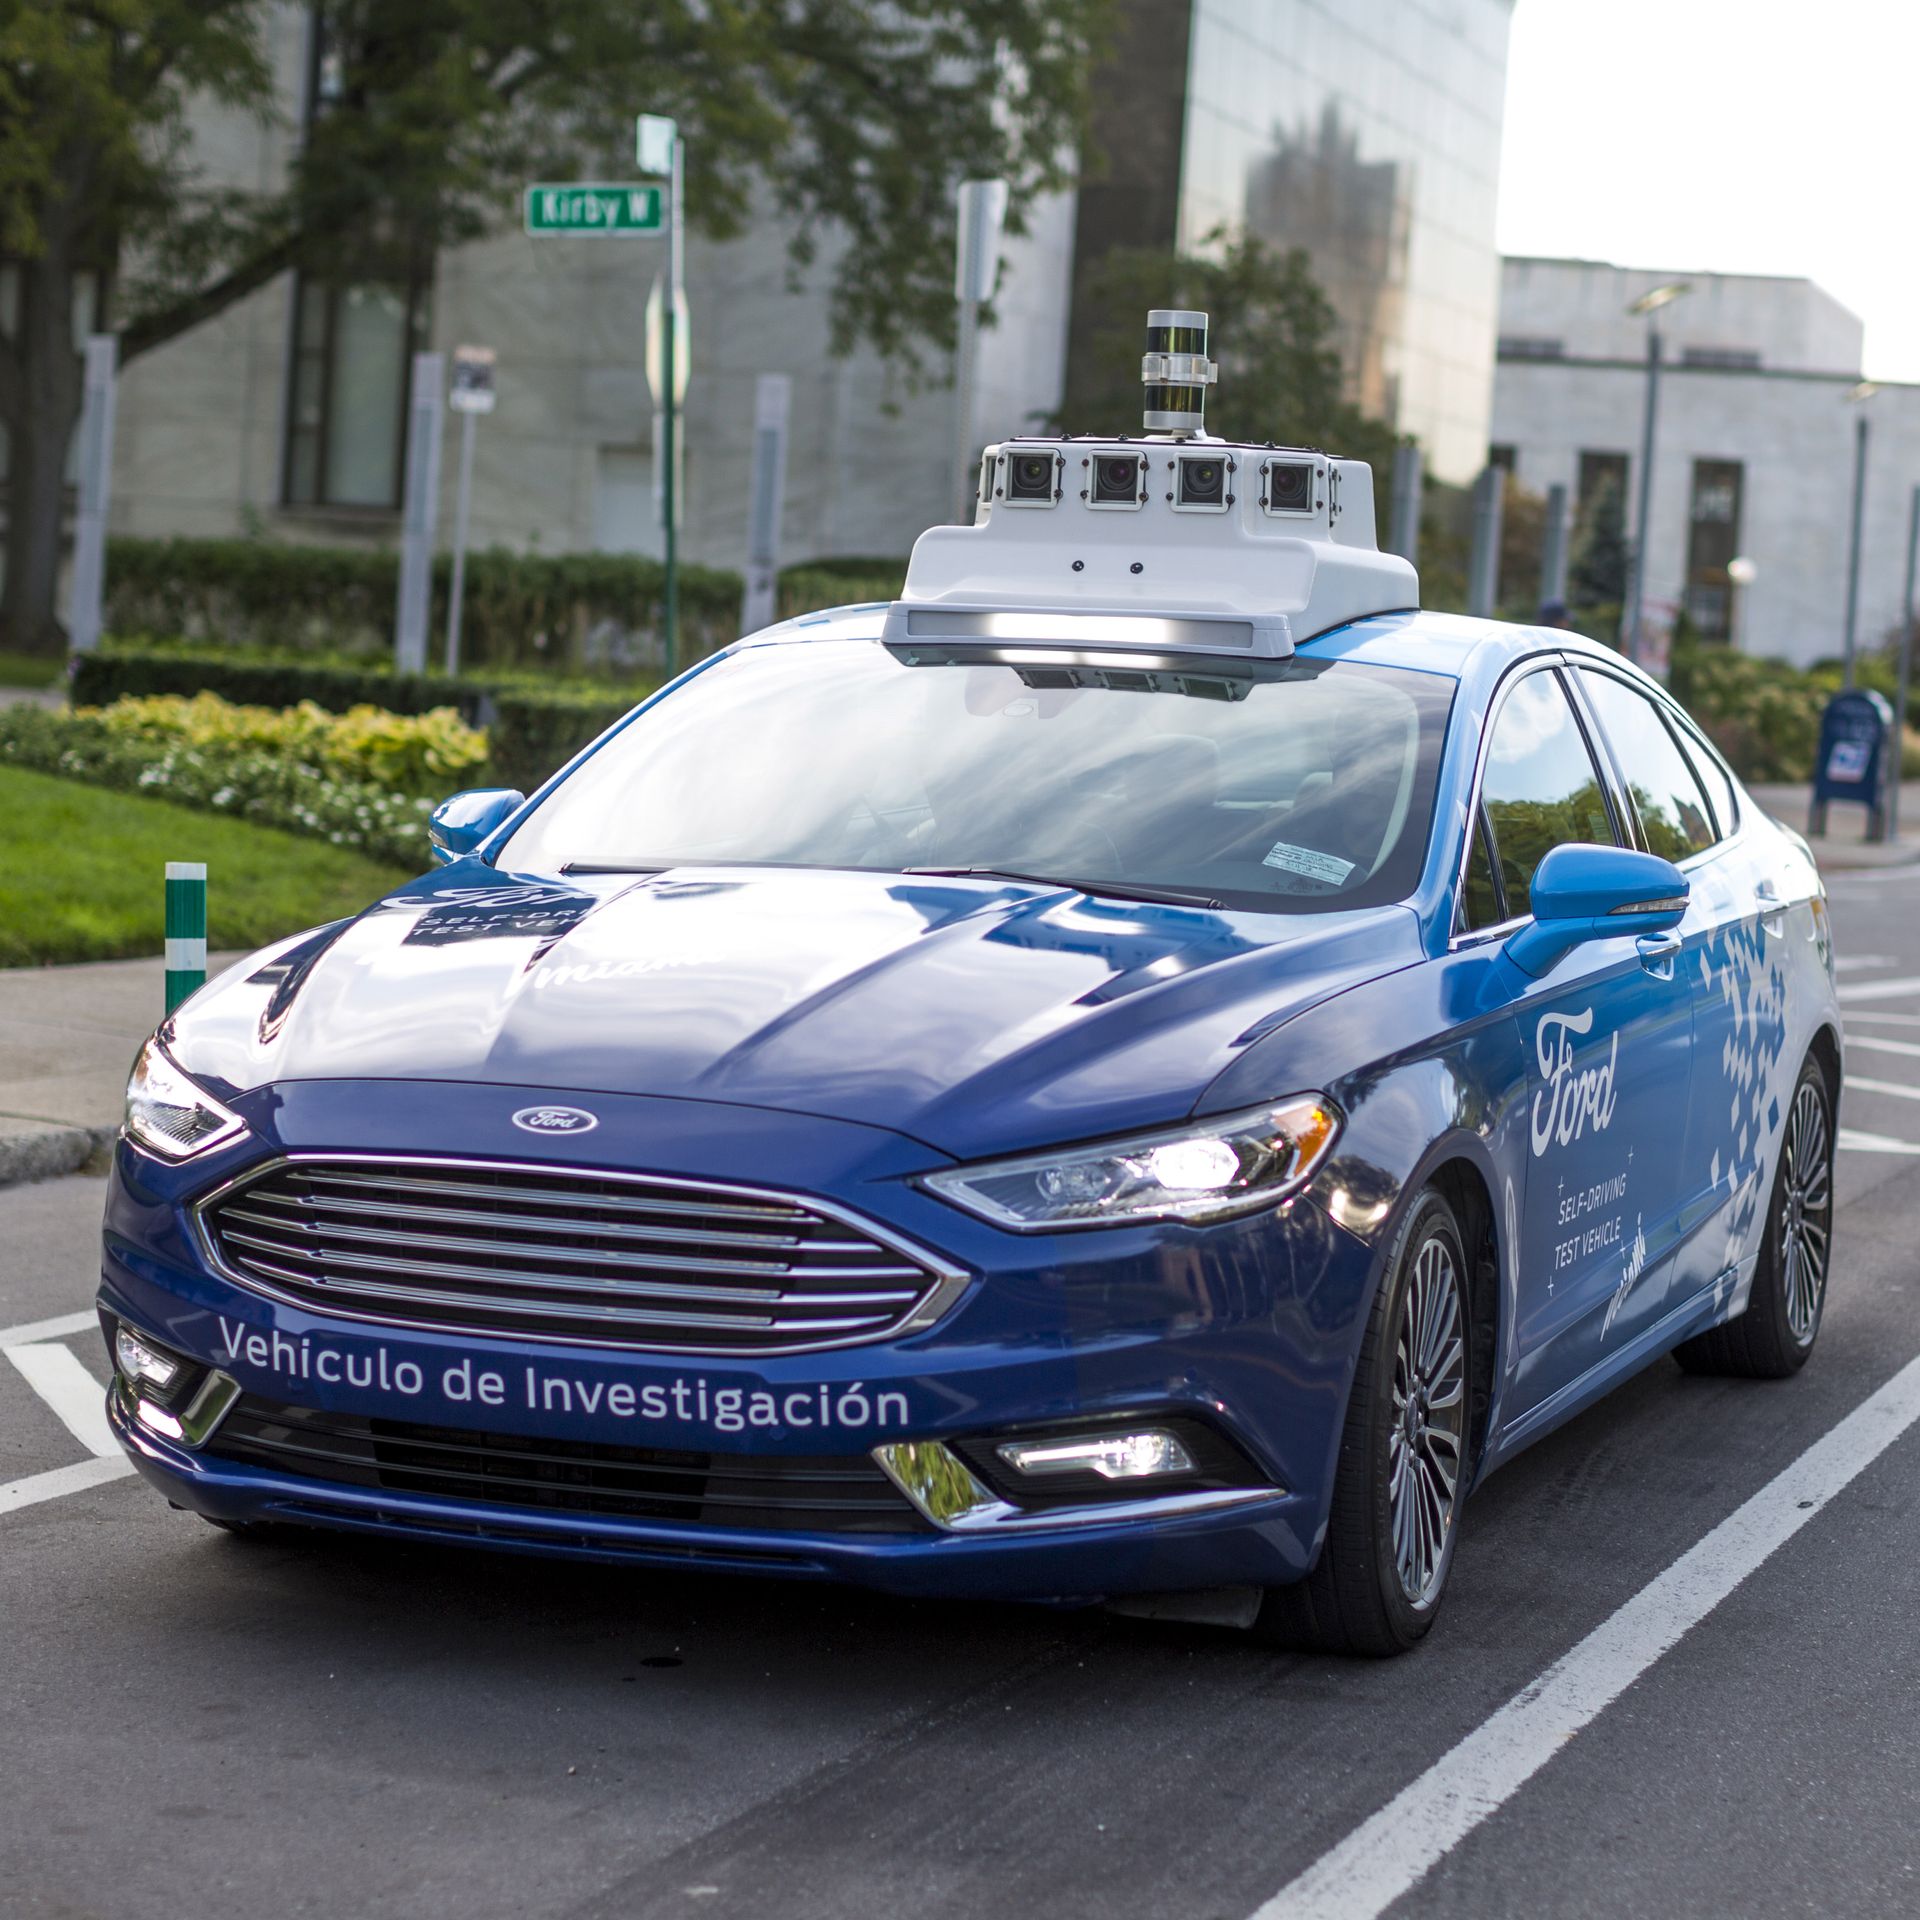 Ford self-driving test vehicle with lightbar communication system